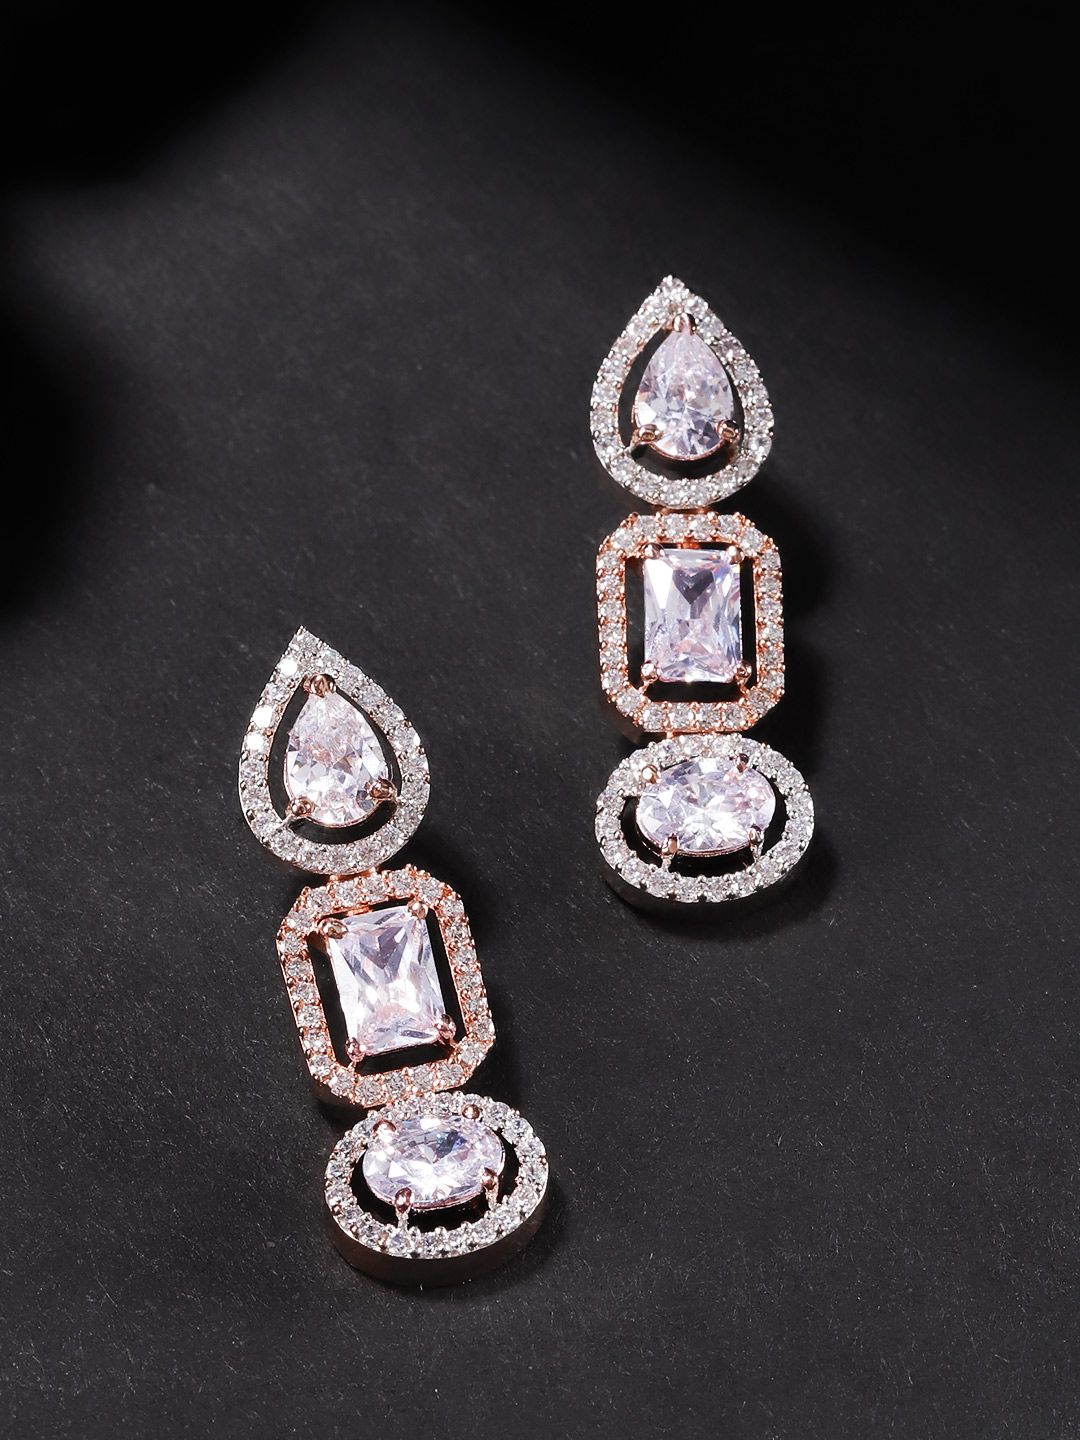 Priyaasi Rose Gold-Plated AD-Studded Handcrafted Geometric Drop Earrings Price in India